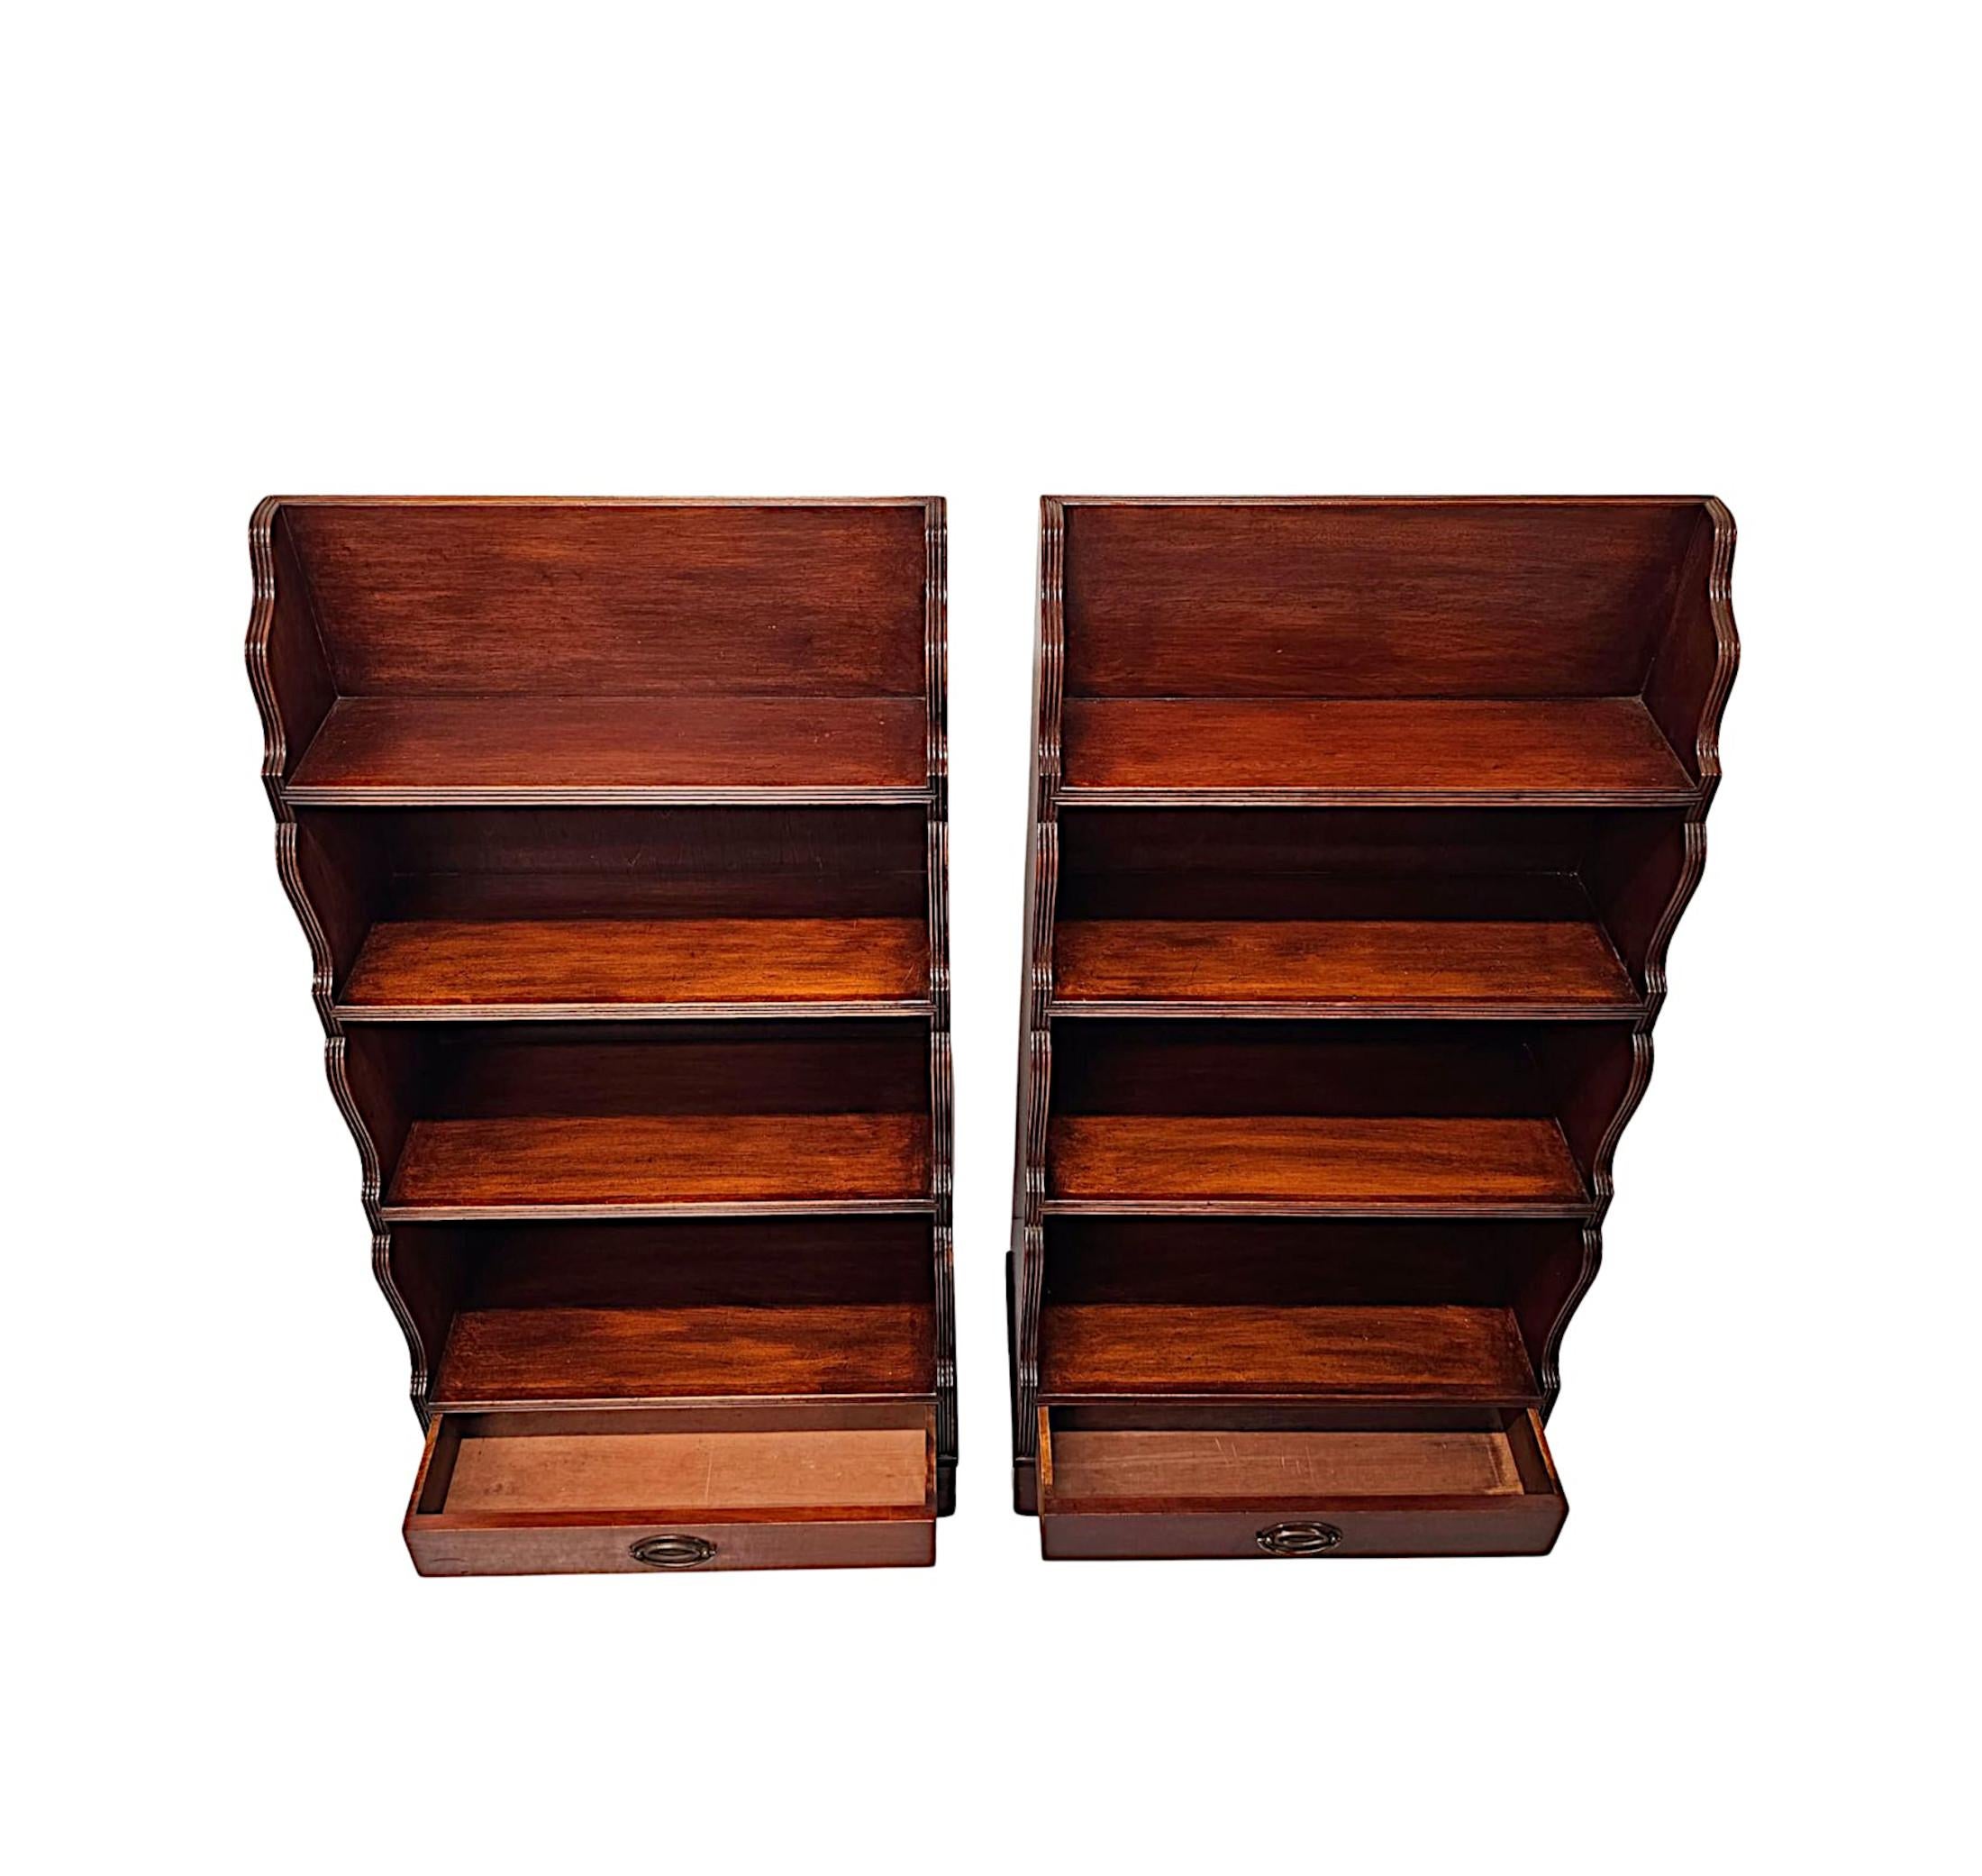 English A Fabulous Pair of Edwardian Waterfall Bookcases For Sale